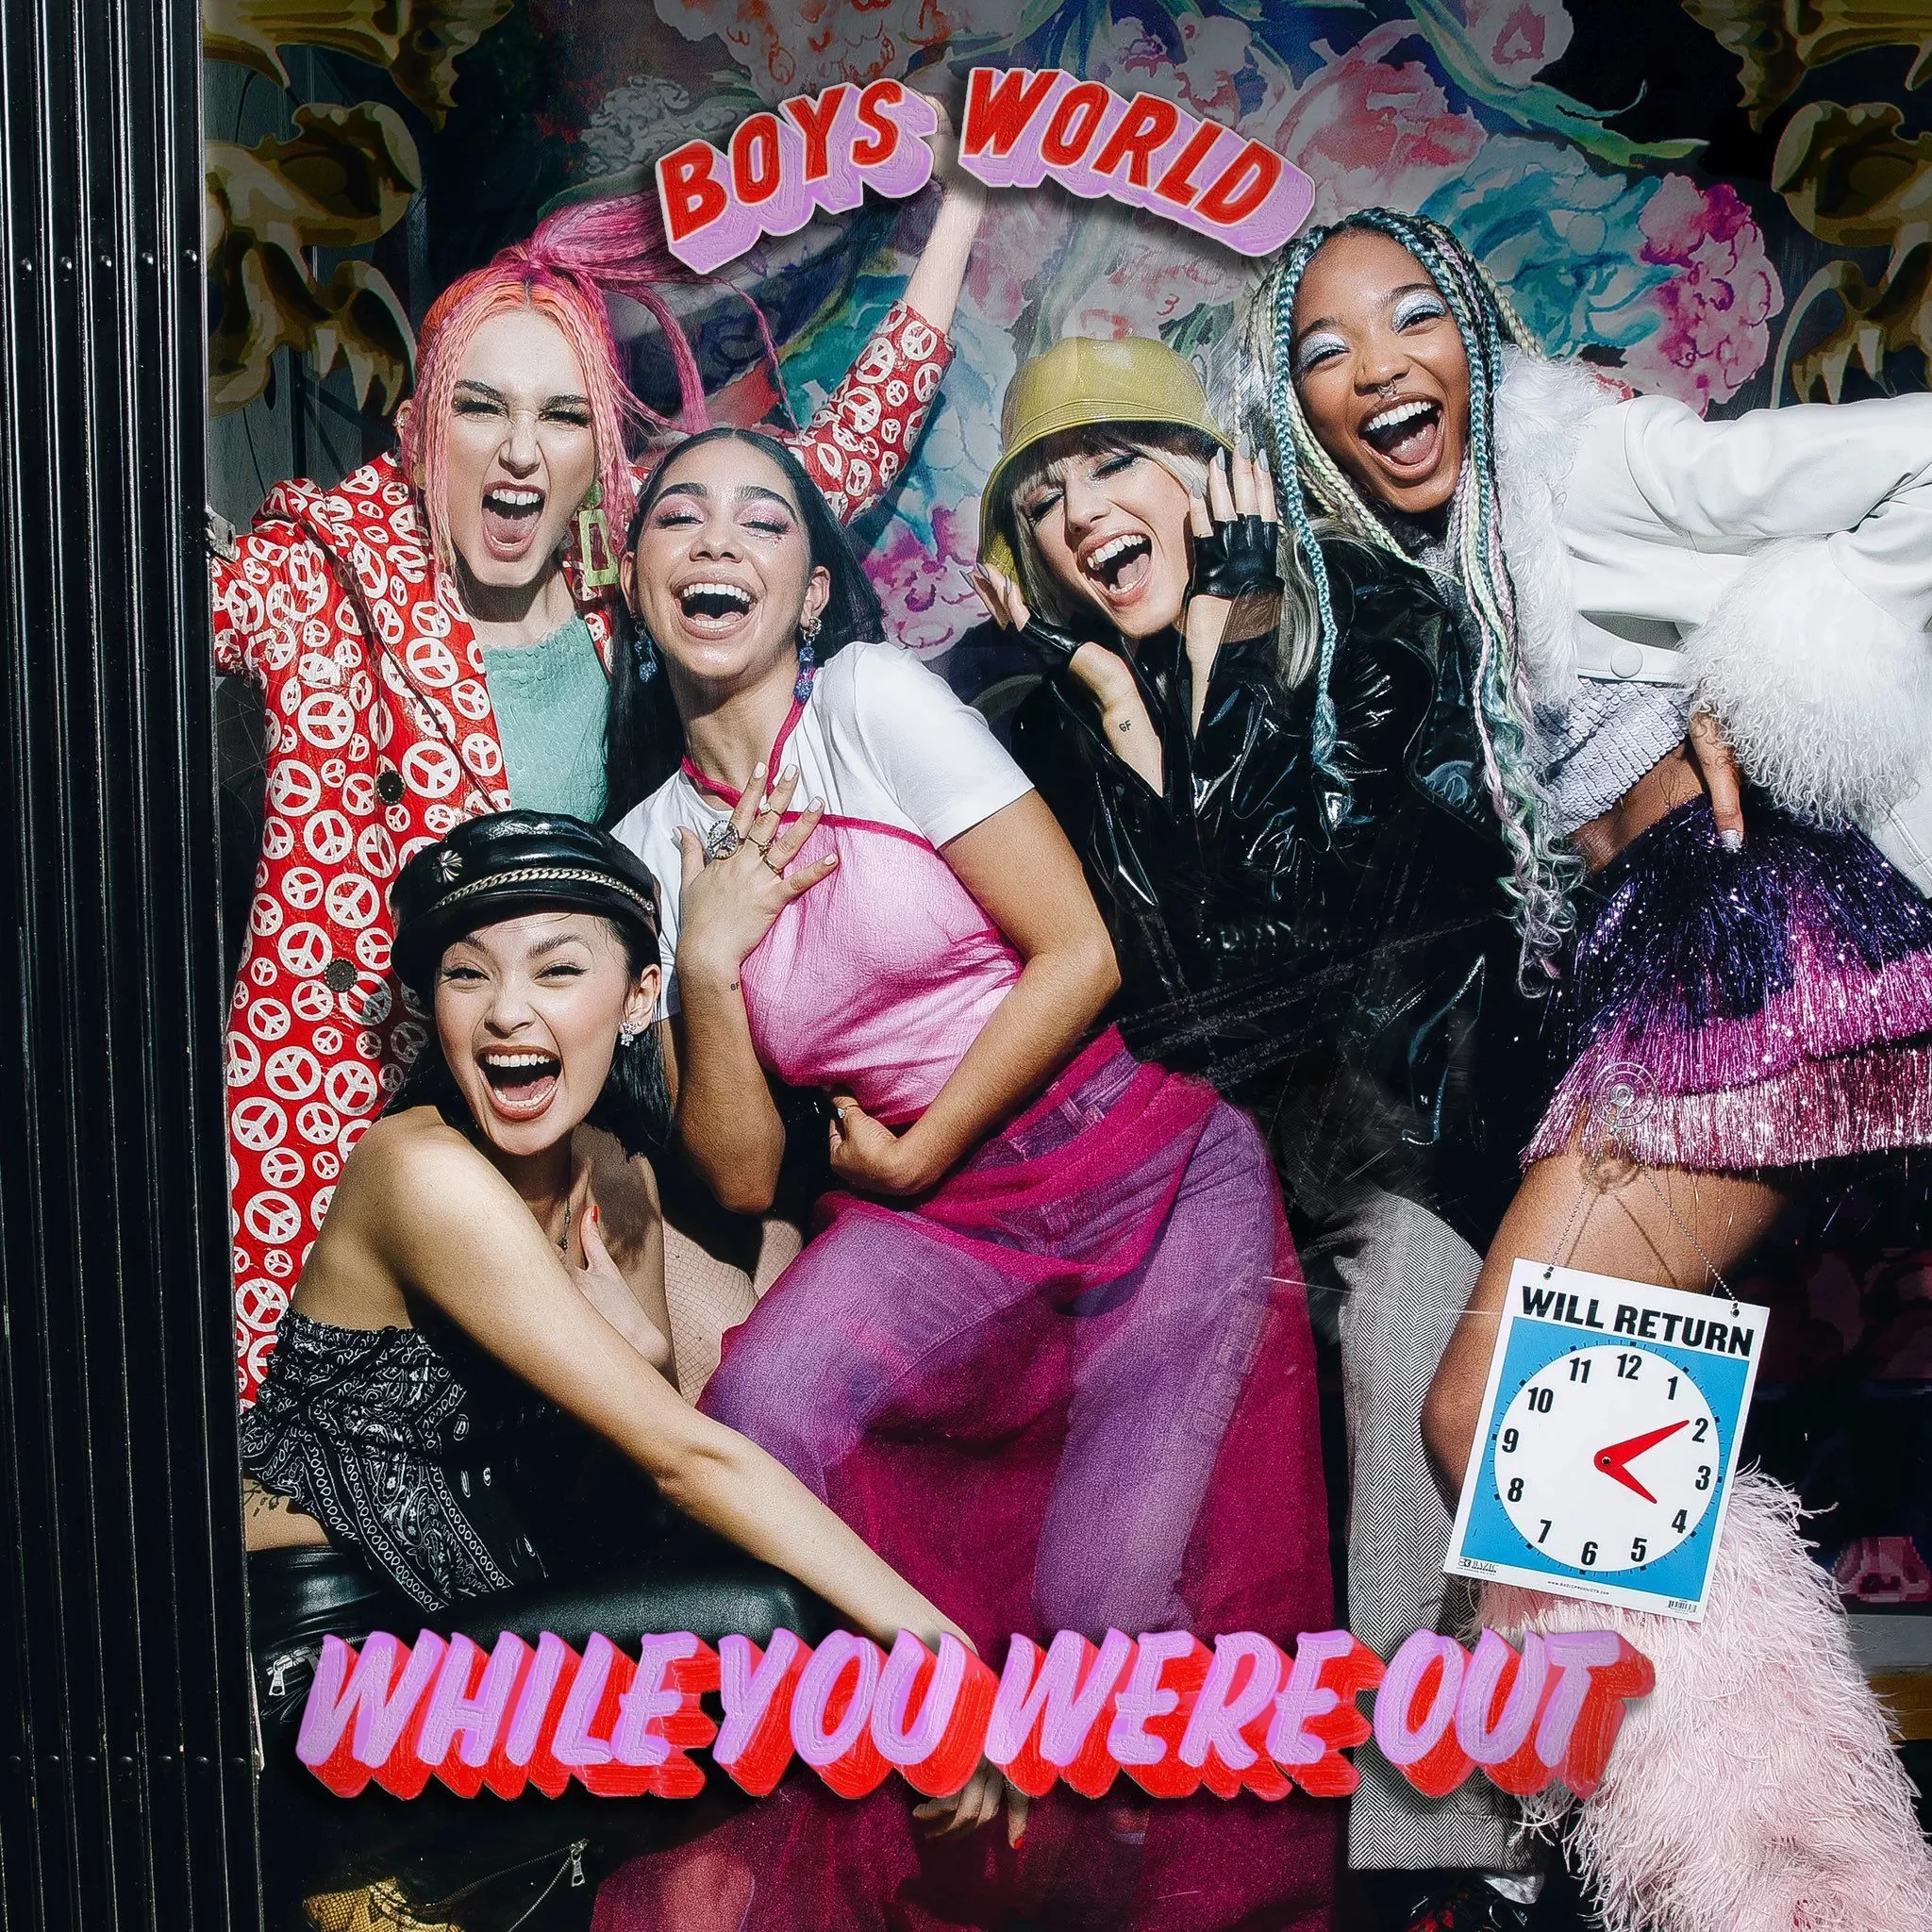 Boys World — While You Were Out cover artwork